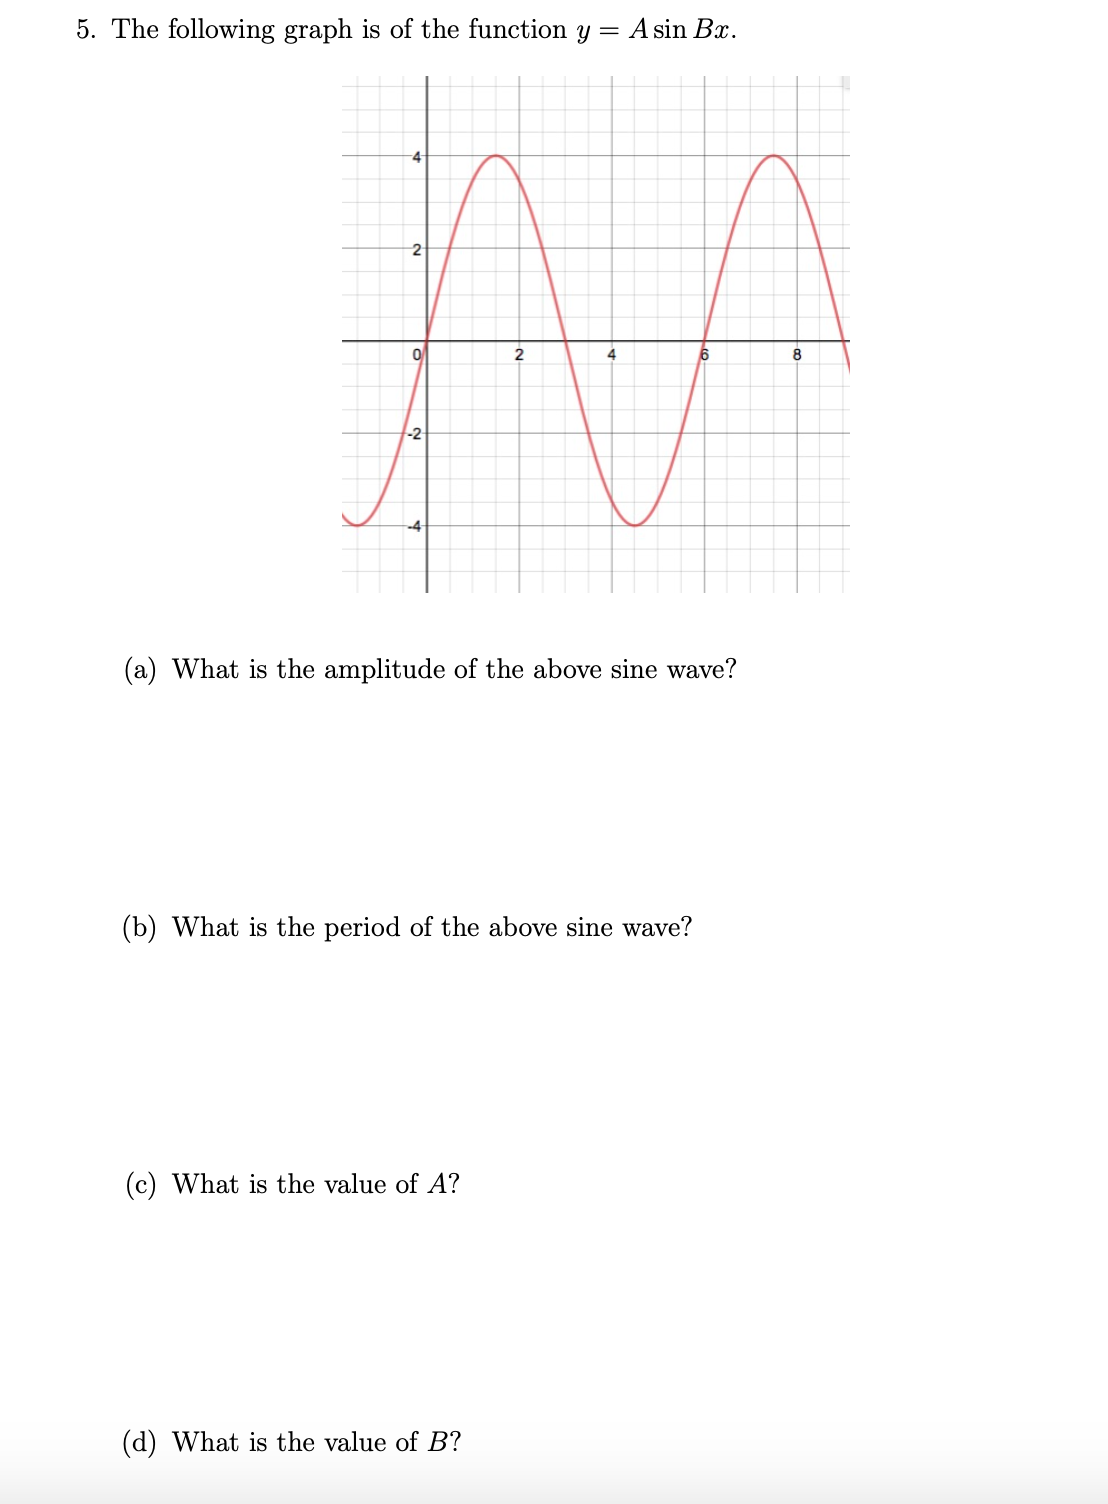 5. The following graph is of the function y = A sin Bx.
2
4
8
-2
-4
(a) What is the amplitude of the above sine wave?
(b) What is the period of the above sine wave?
(c) What is the value of A?
(d) What is the value of B?
